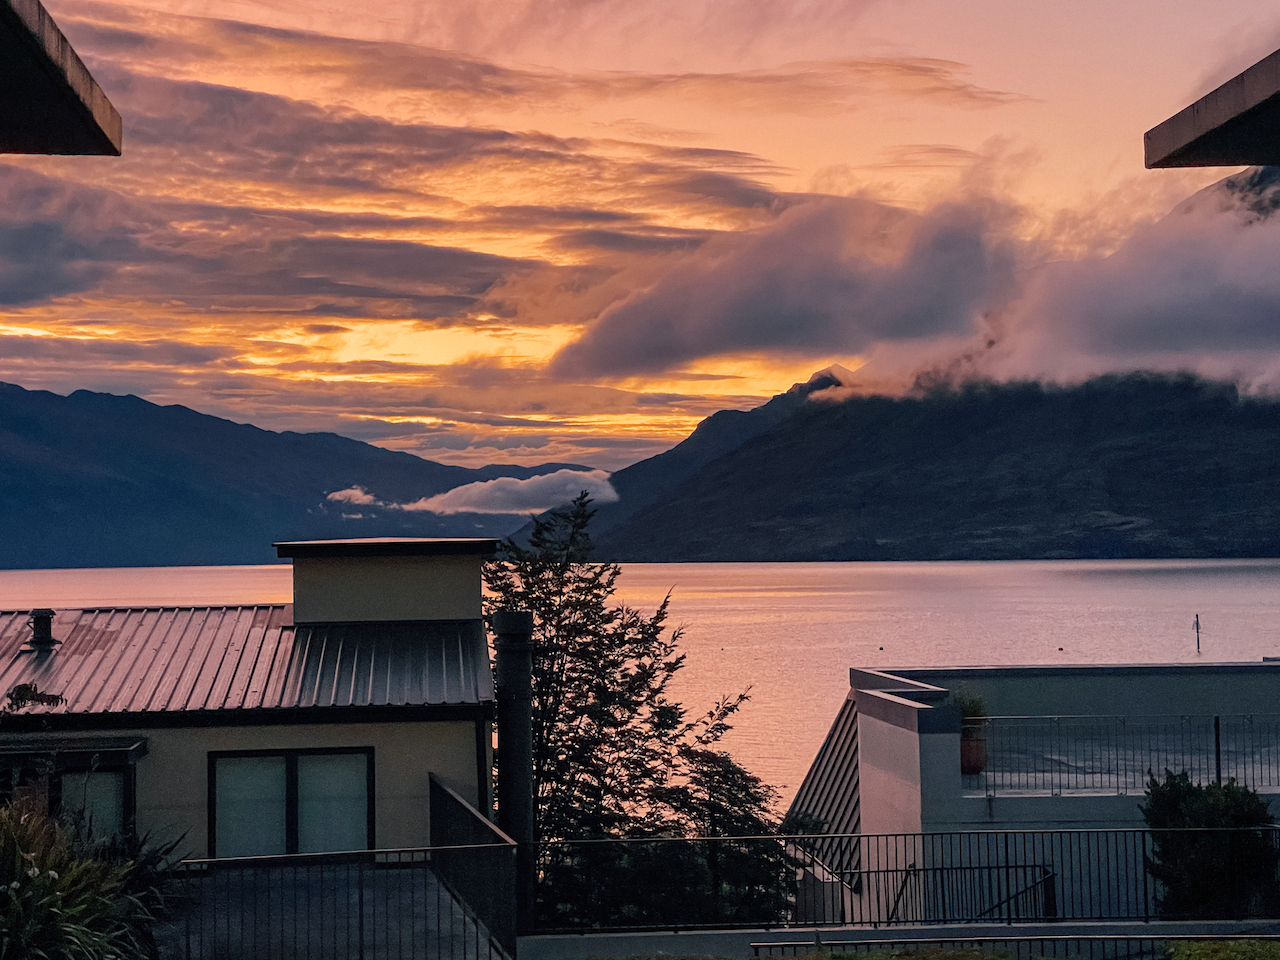 Sunset view from our Airbnb - Queenstown - New Zealand